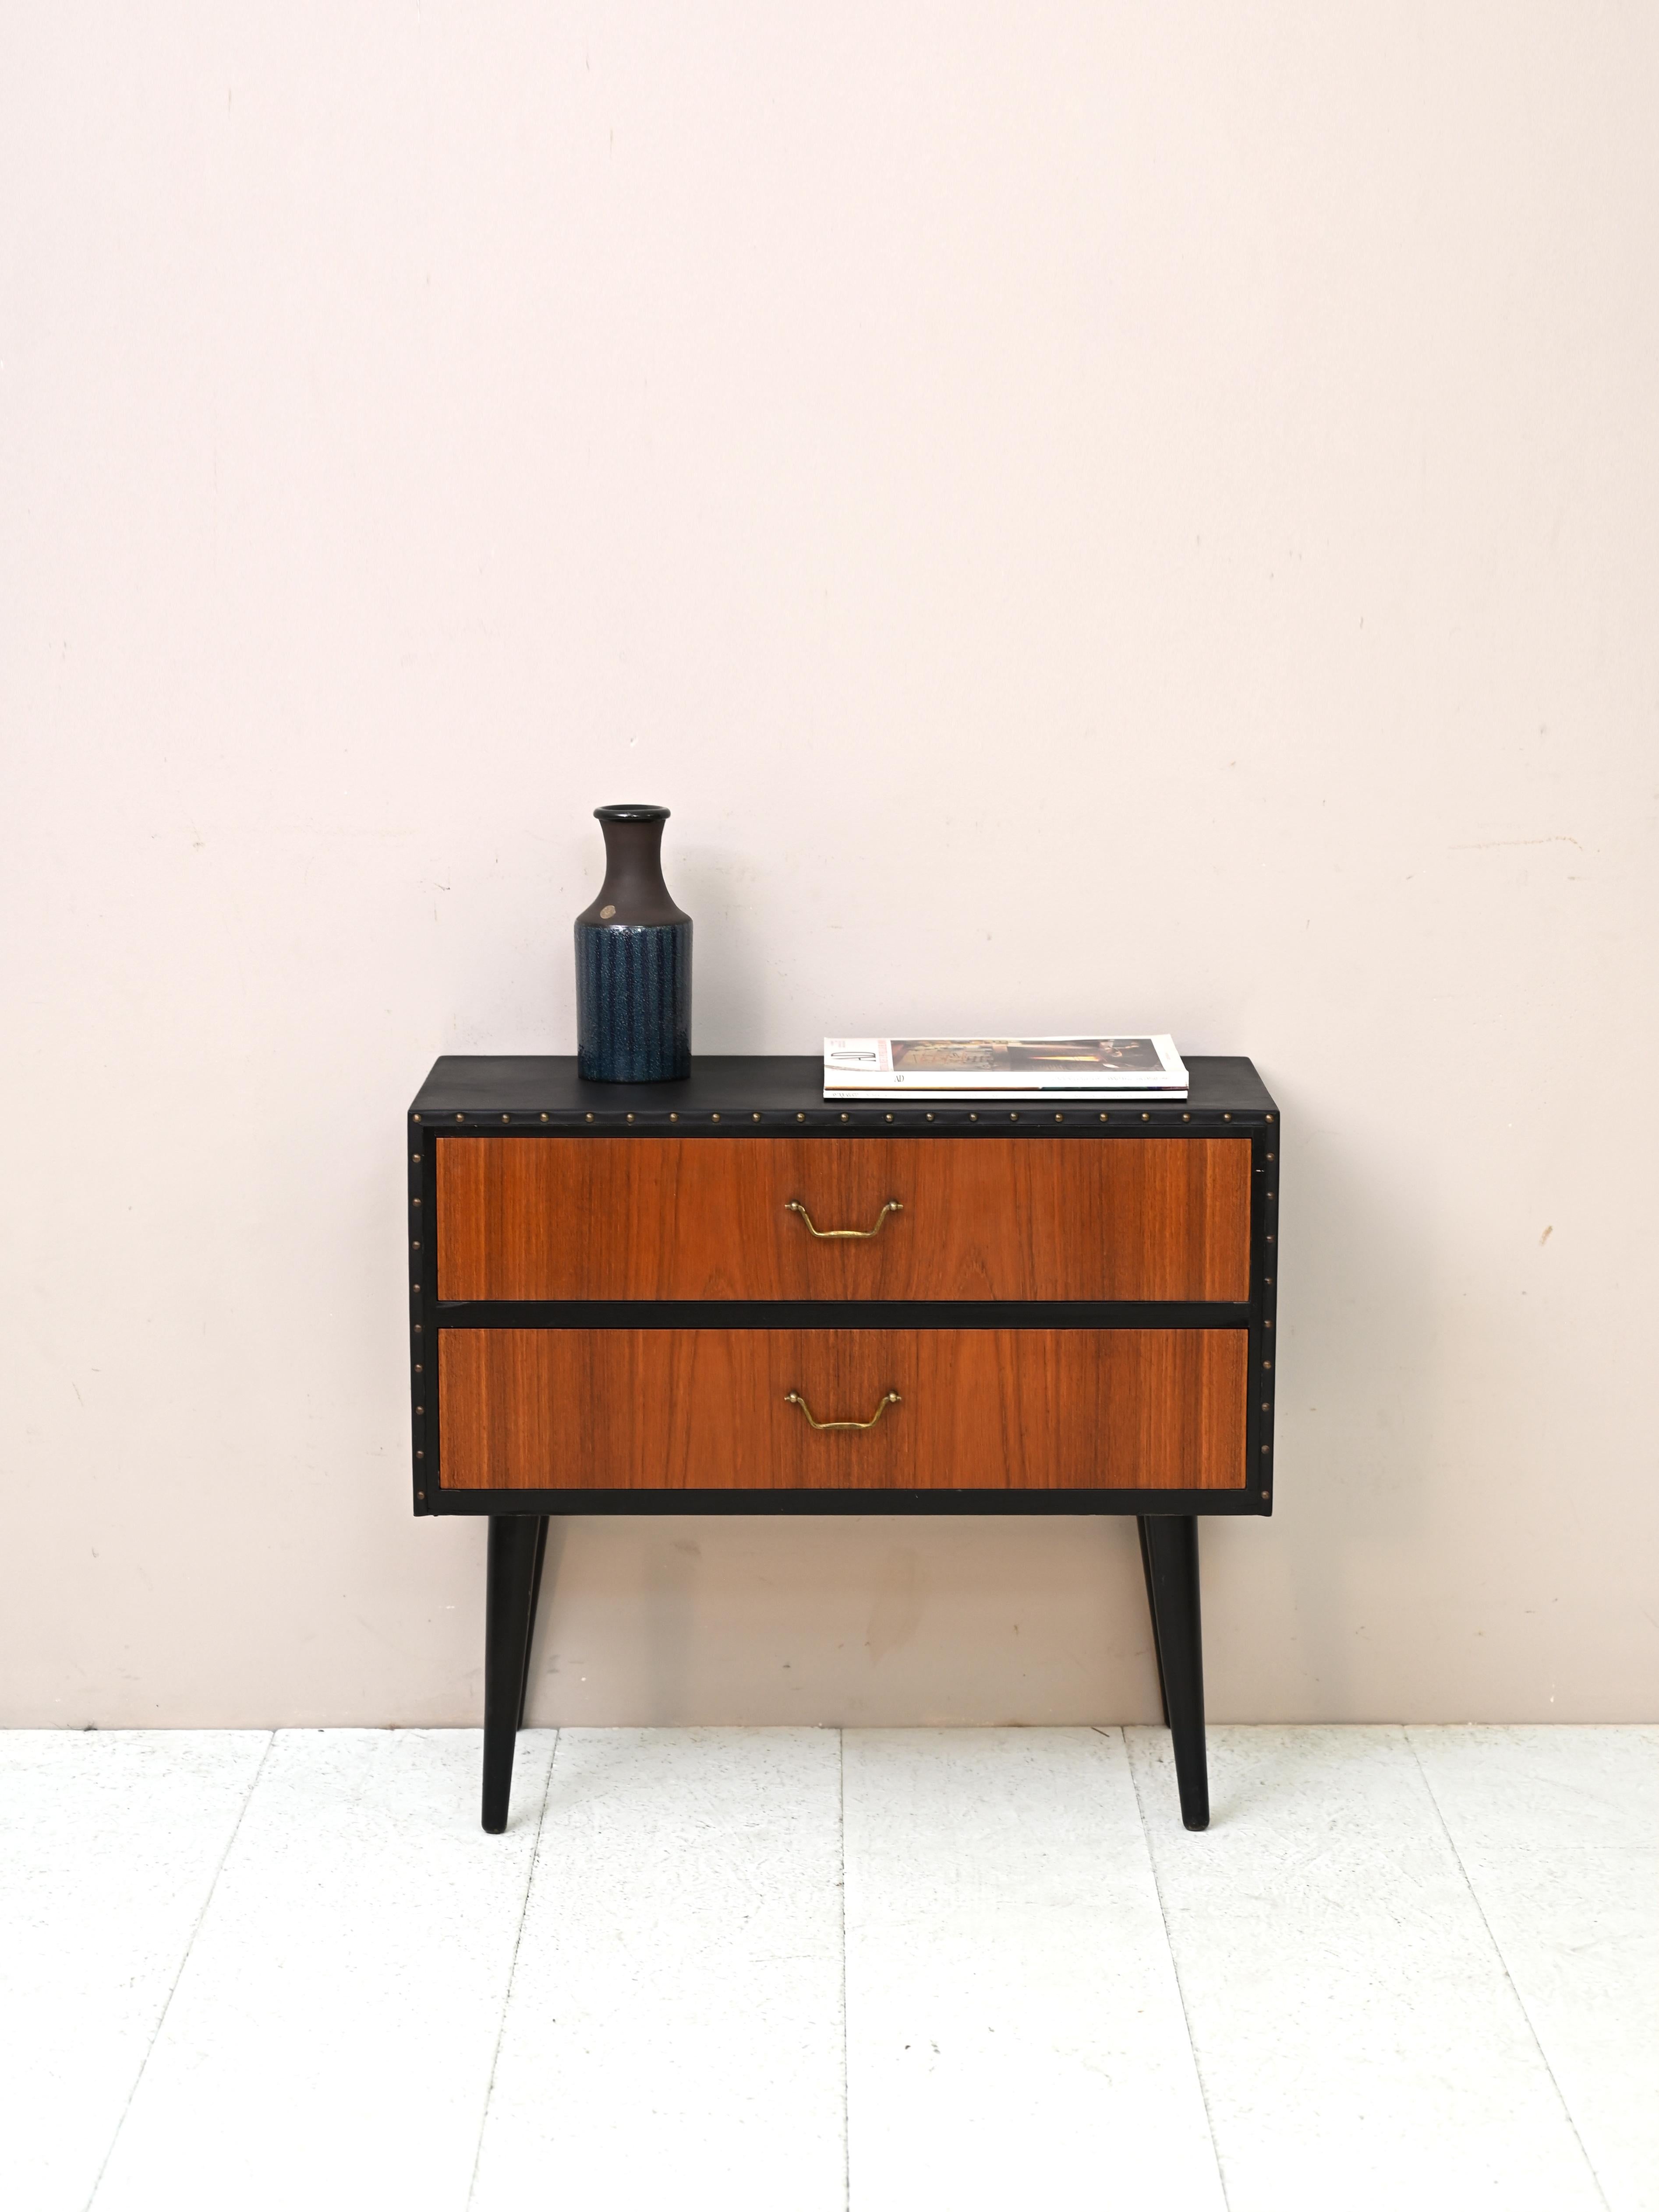 Peculiar cabinet of Scandinavian origin with two drawers.

Features black leatherette upholstery on the top and sides. 

An original design piece, ideal for adding character to a bedroom or entryway.

Good condition. Has been restored with